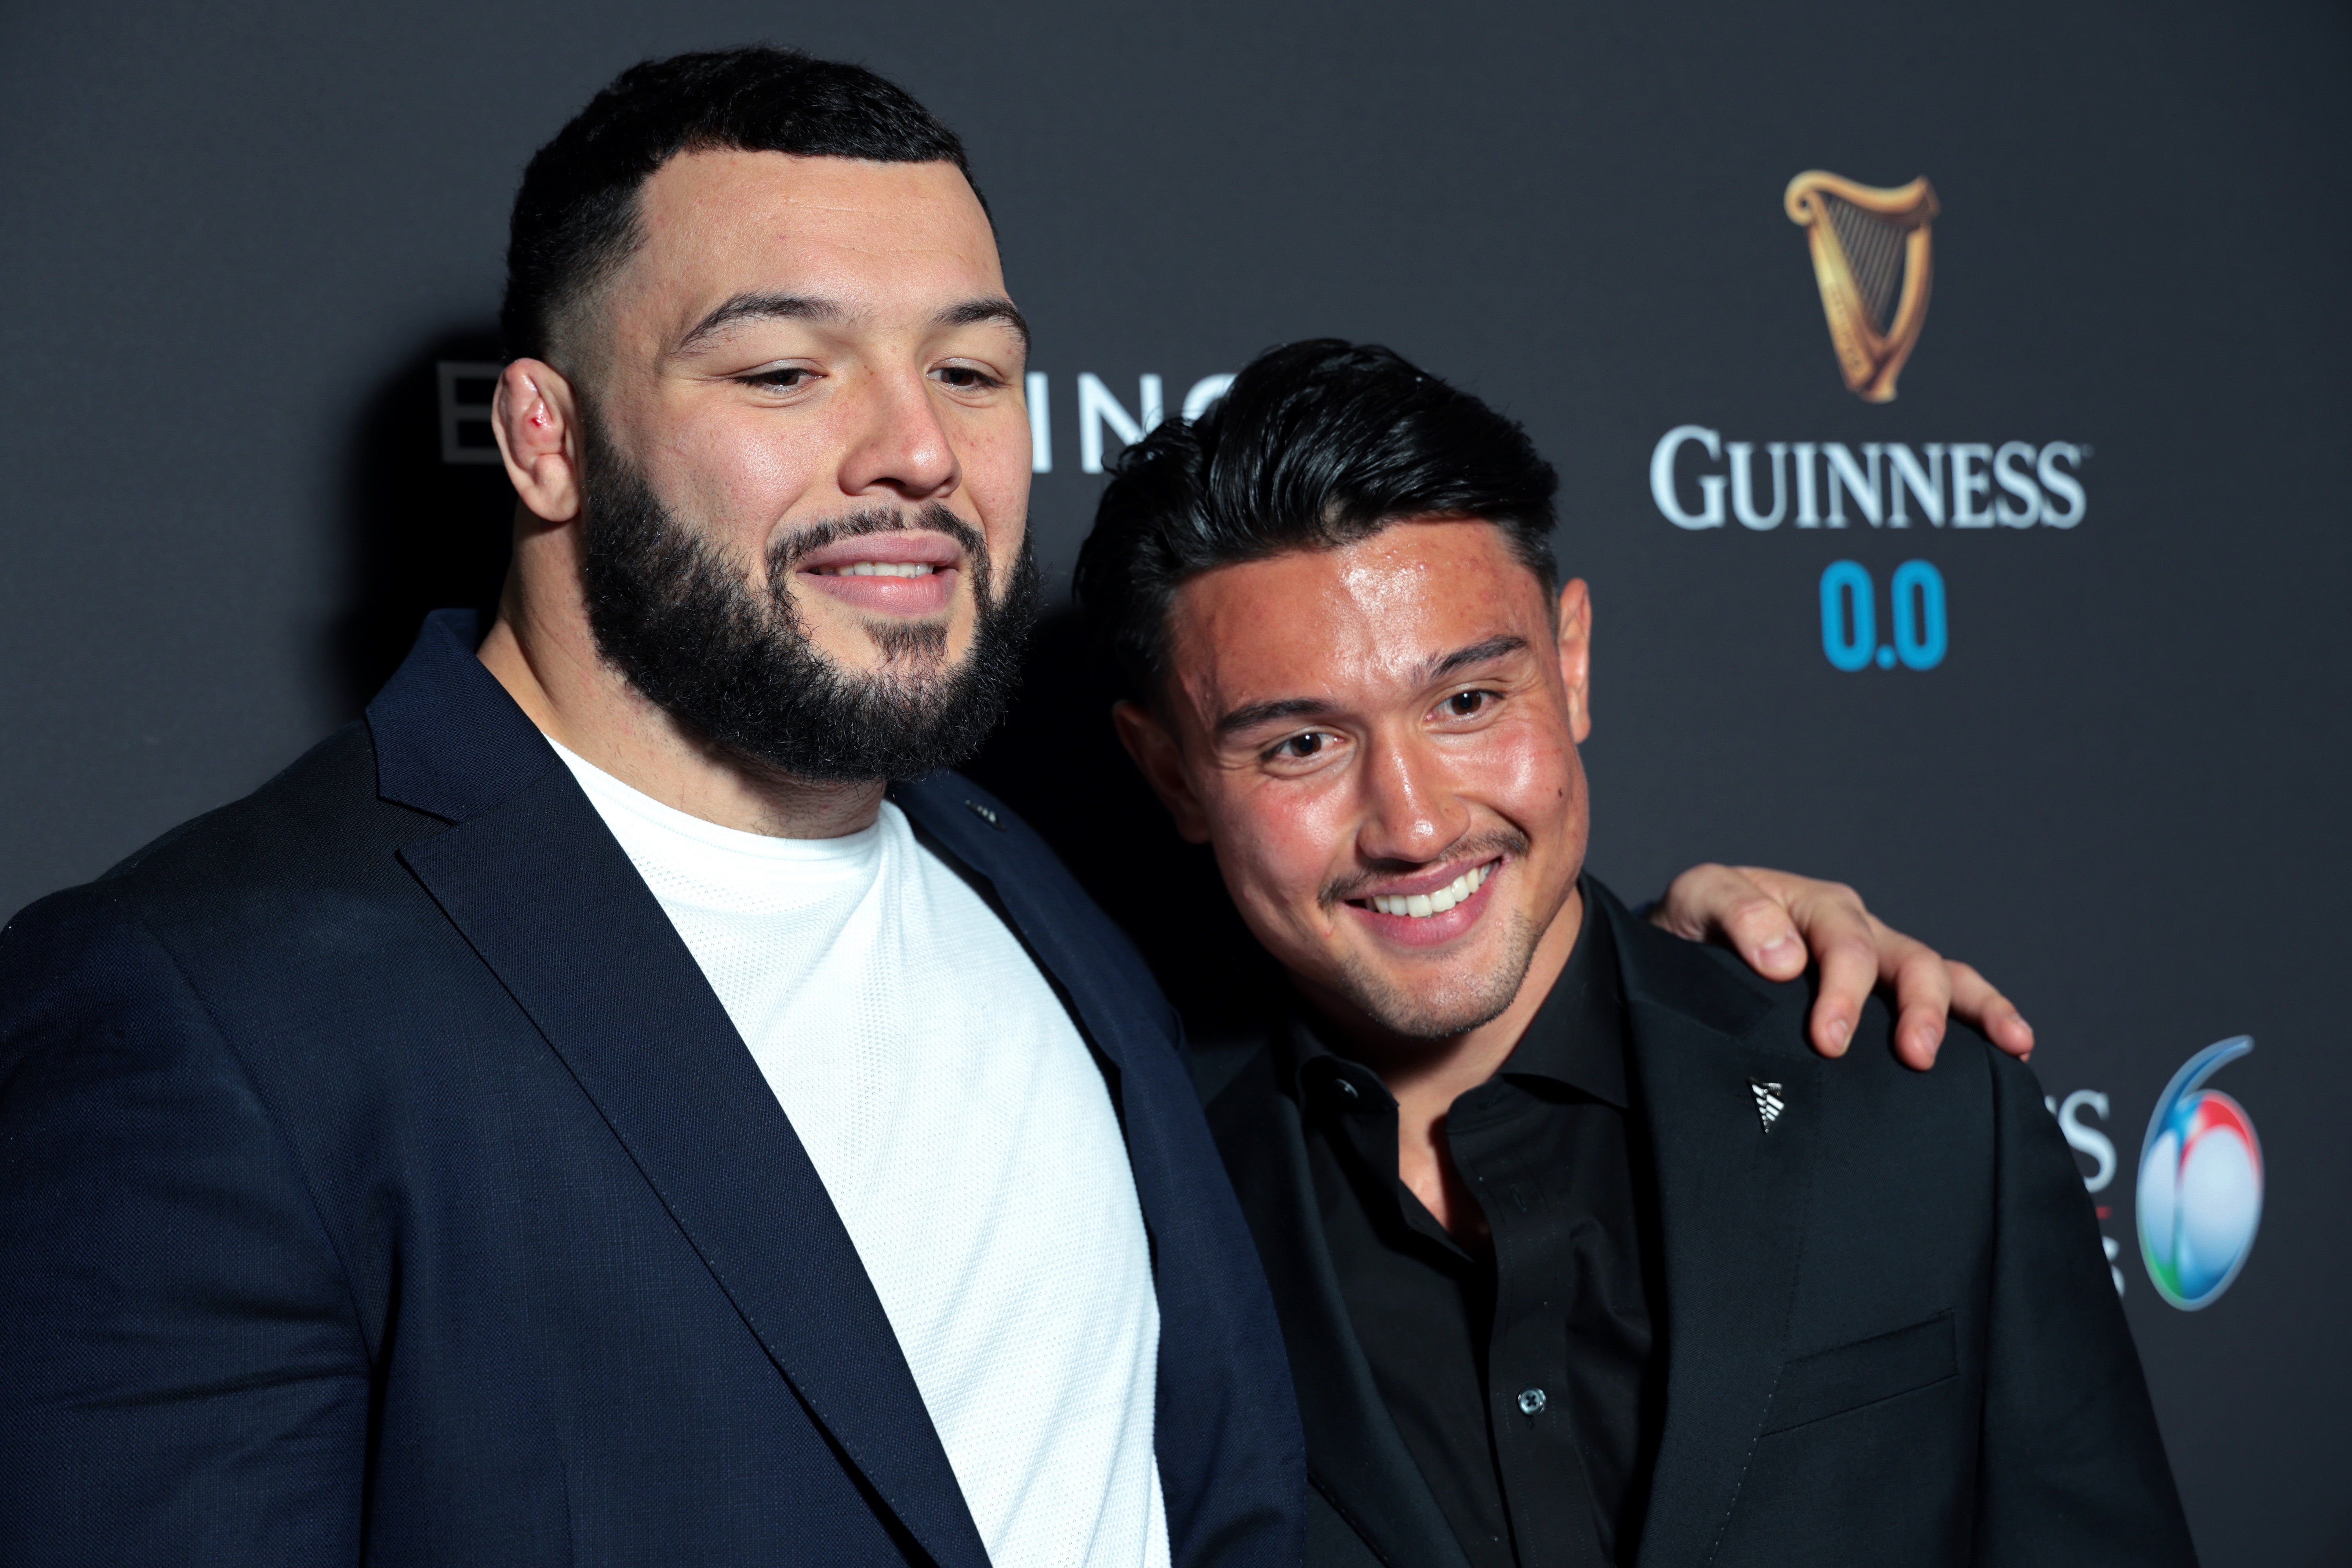 Genge (left) was joined by the likes of England teammate Marcus Smith on the red carpet for the Netflix documentary premiere